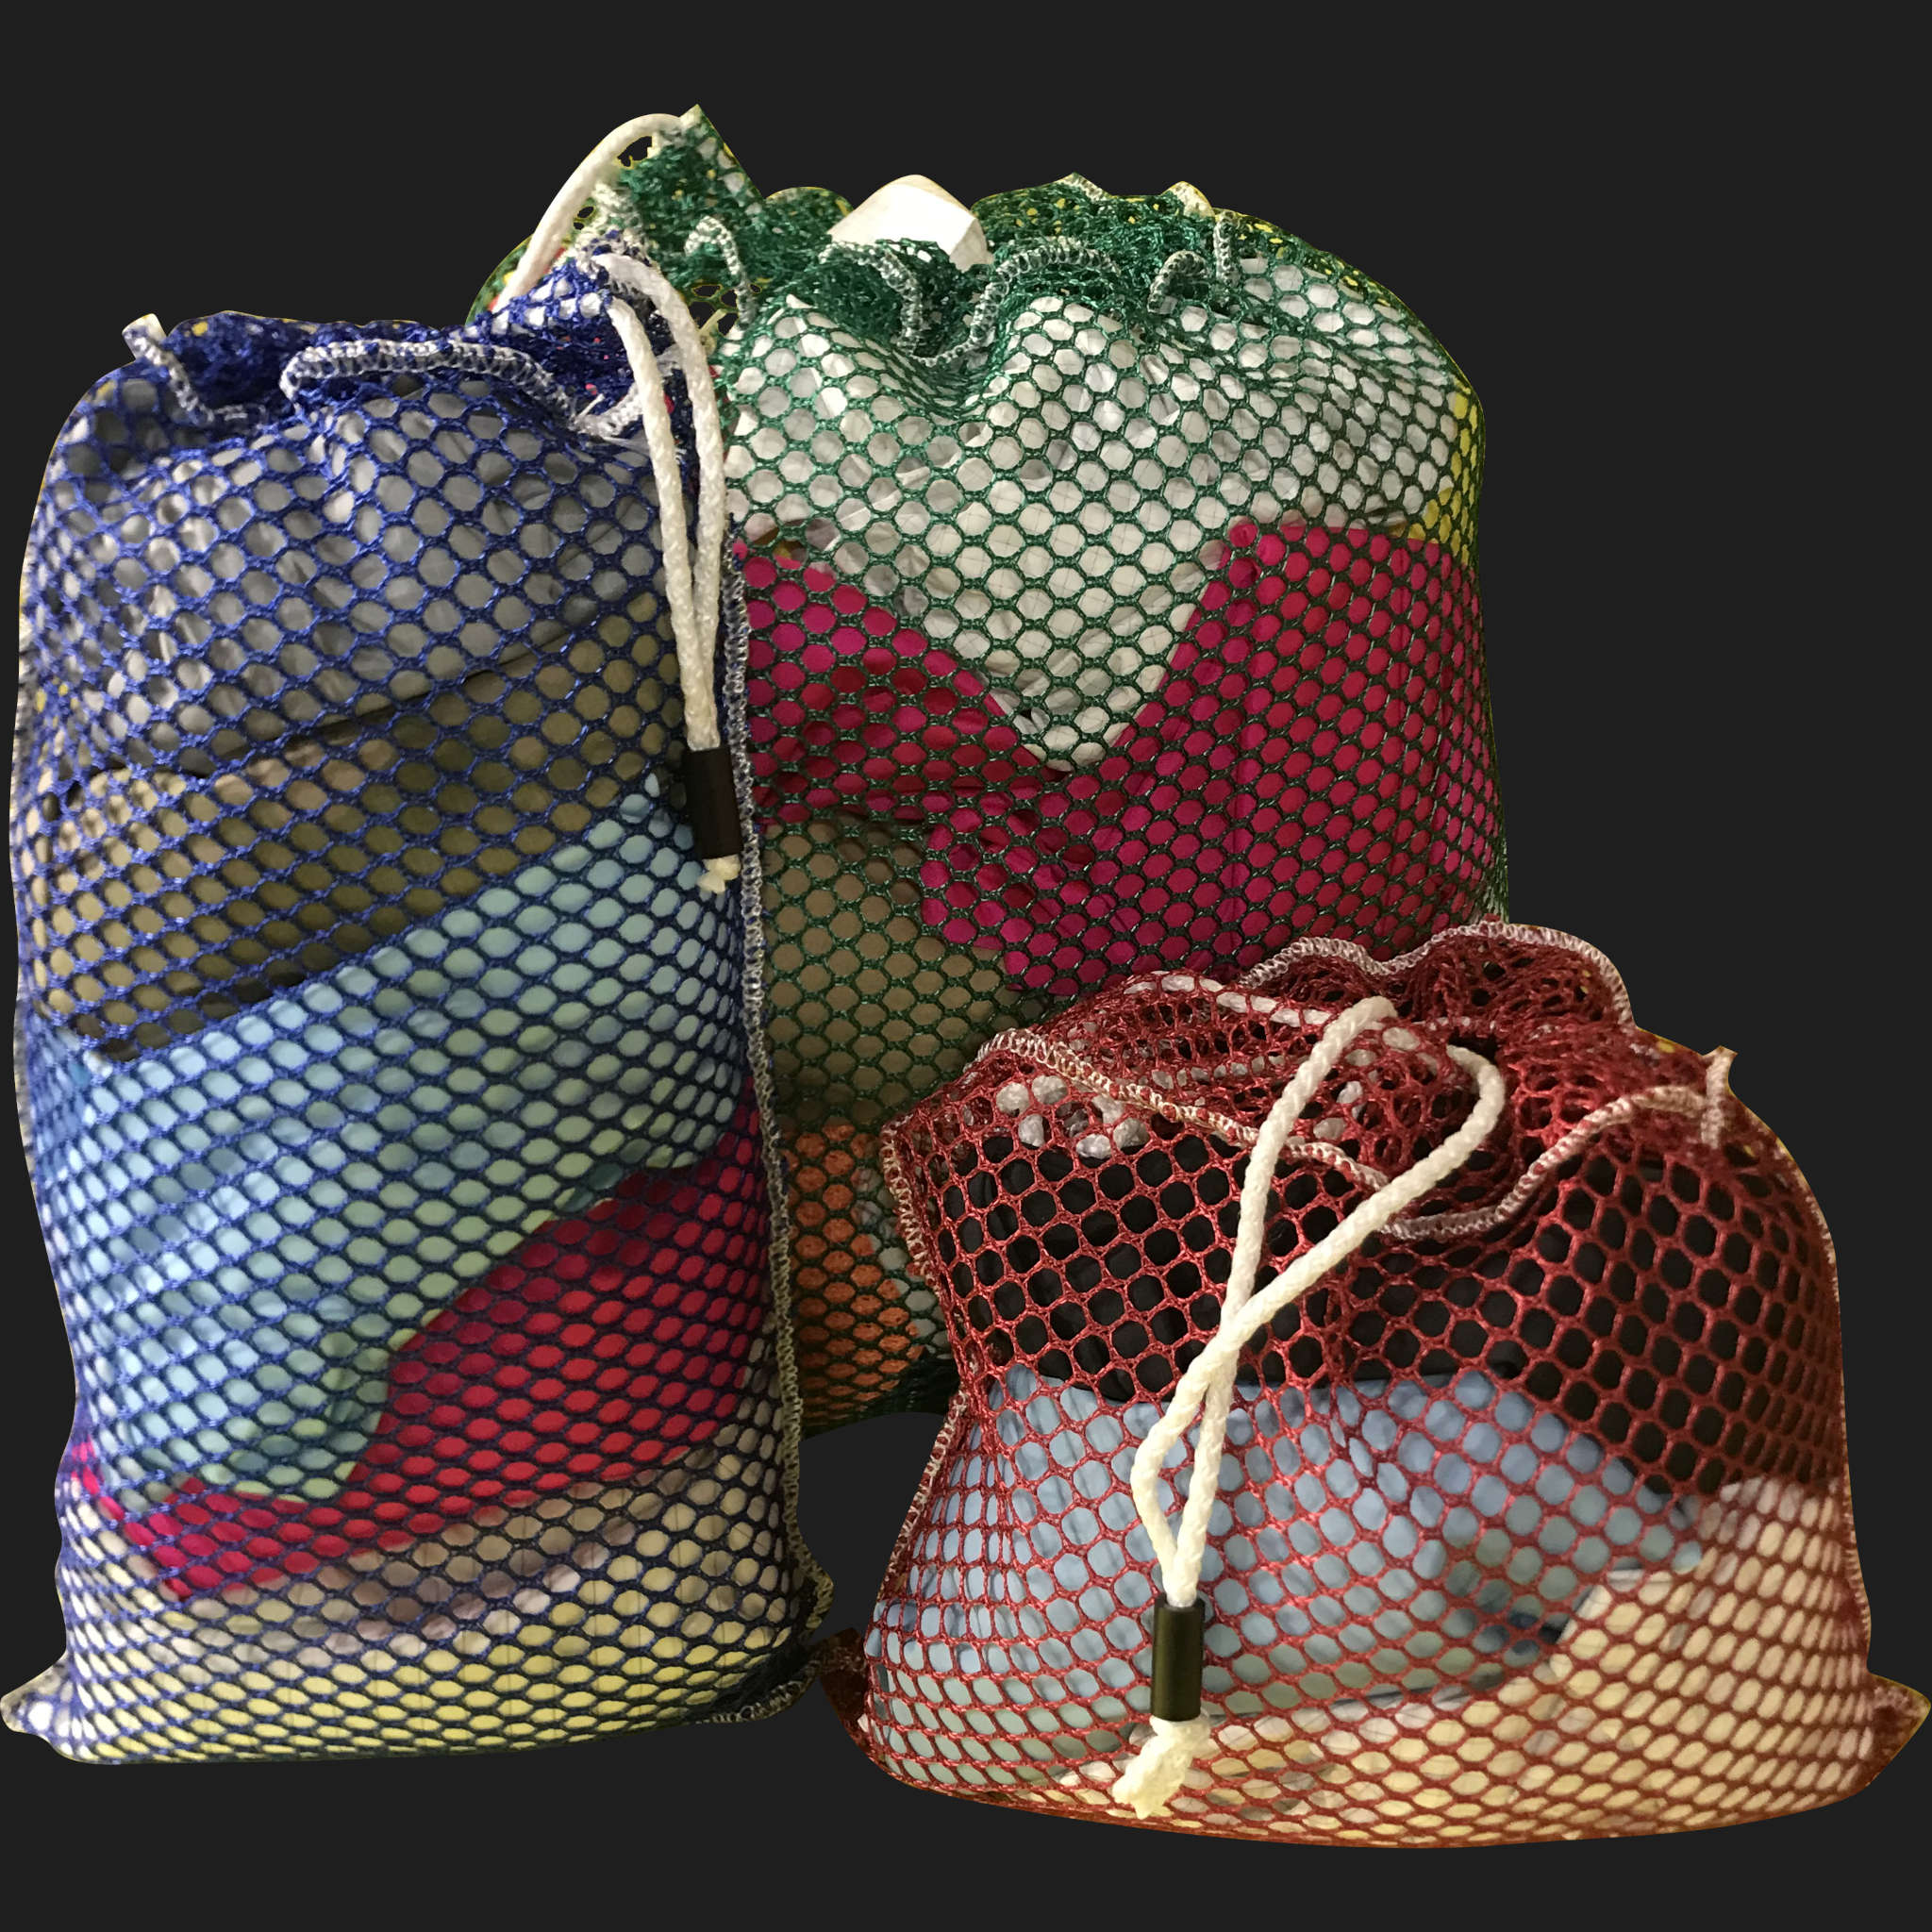 18" x 34" Customized Mesh-Net-Laundry Bags Heavy Duty with Cord and barrellock closure